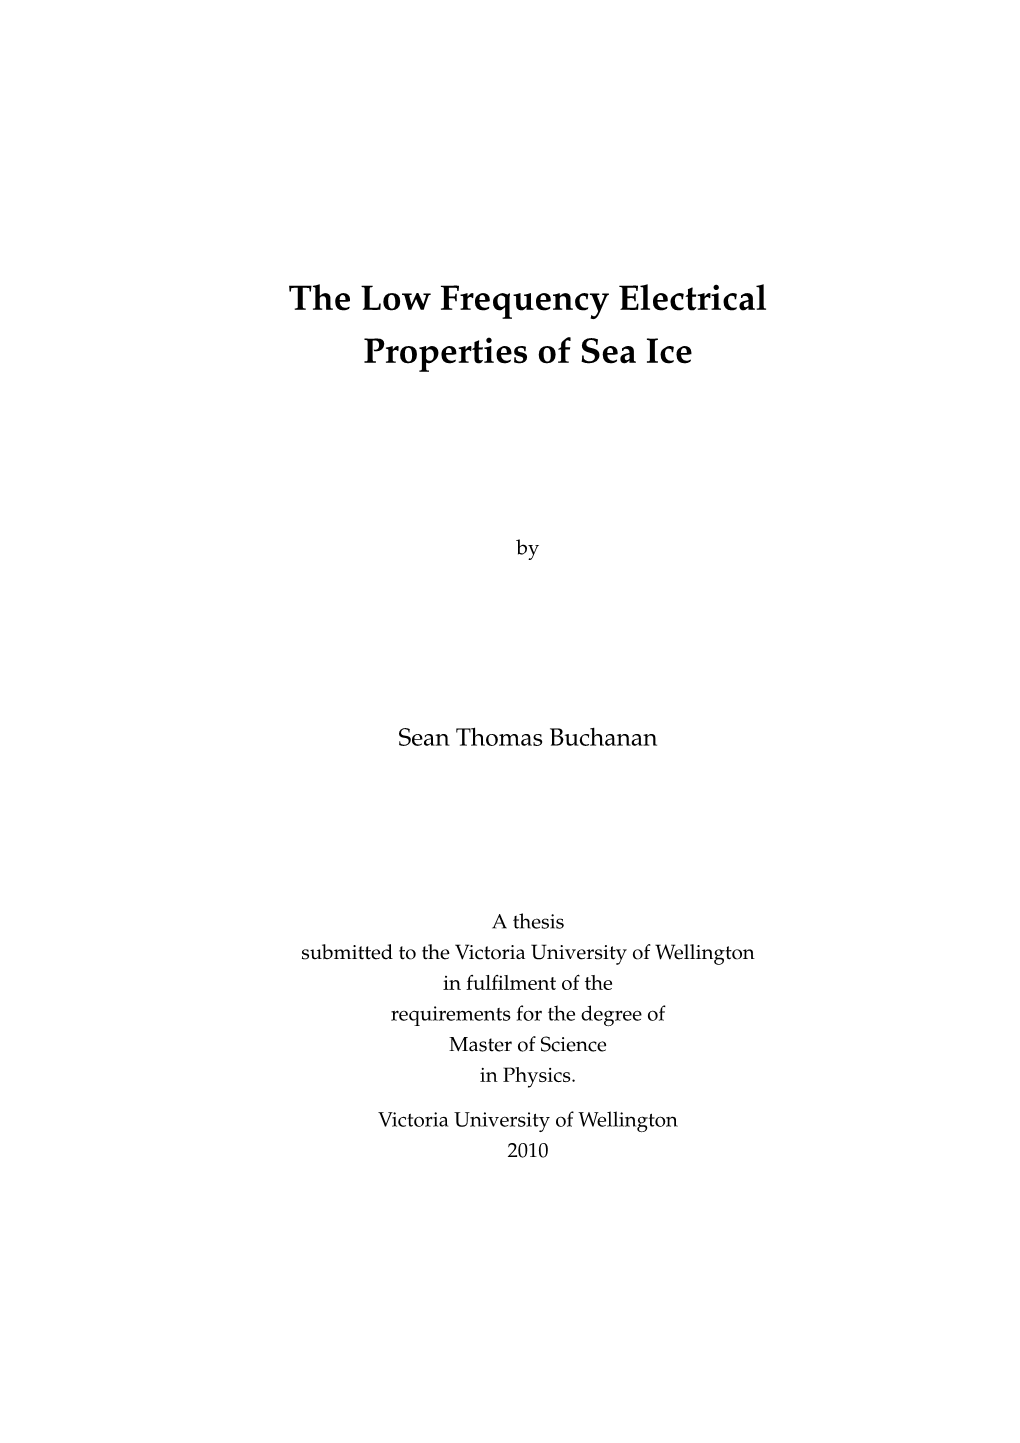 The Low Frequency Electrical Properties of Sea Ice